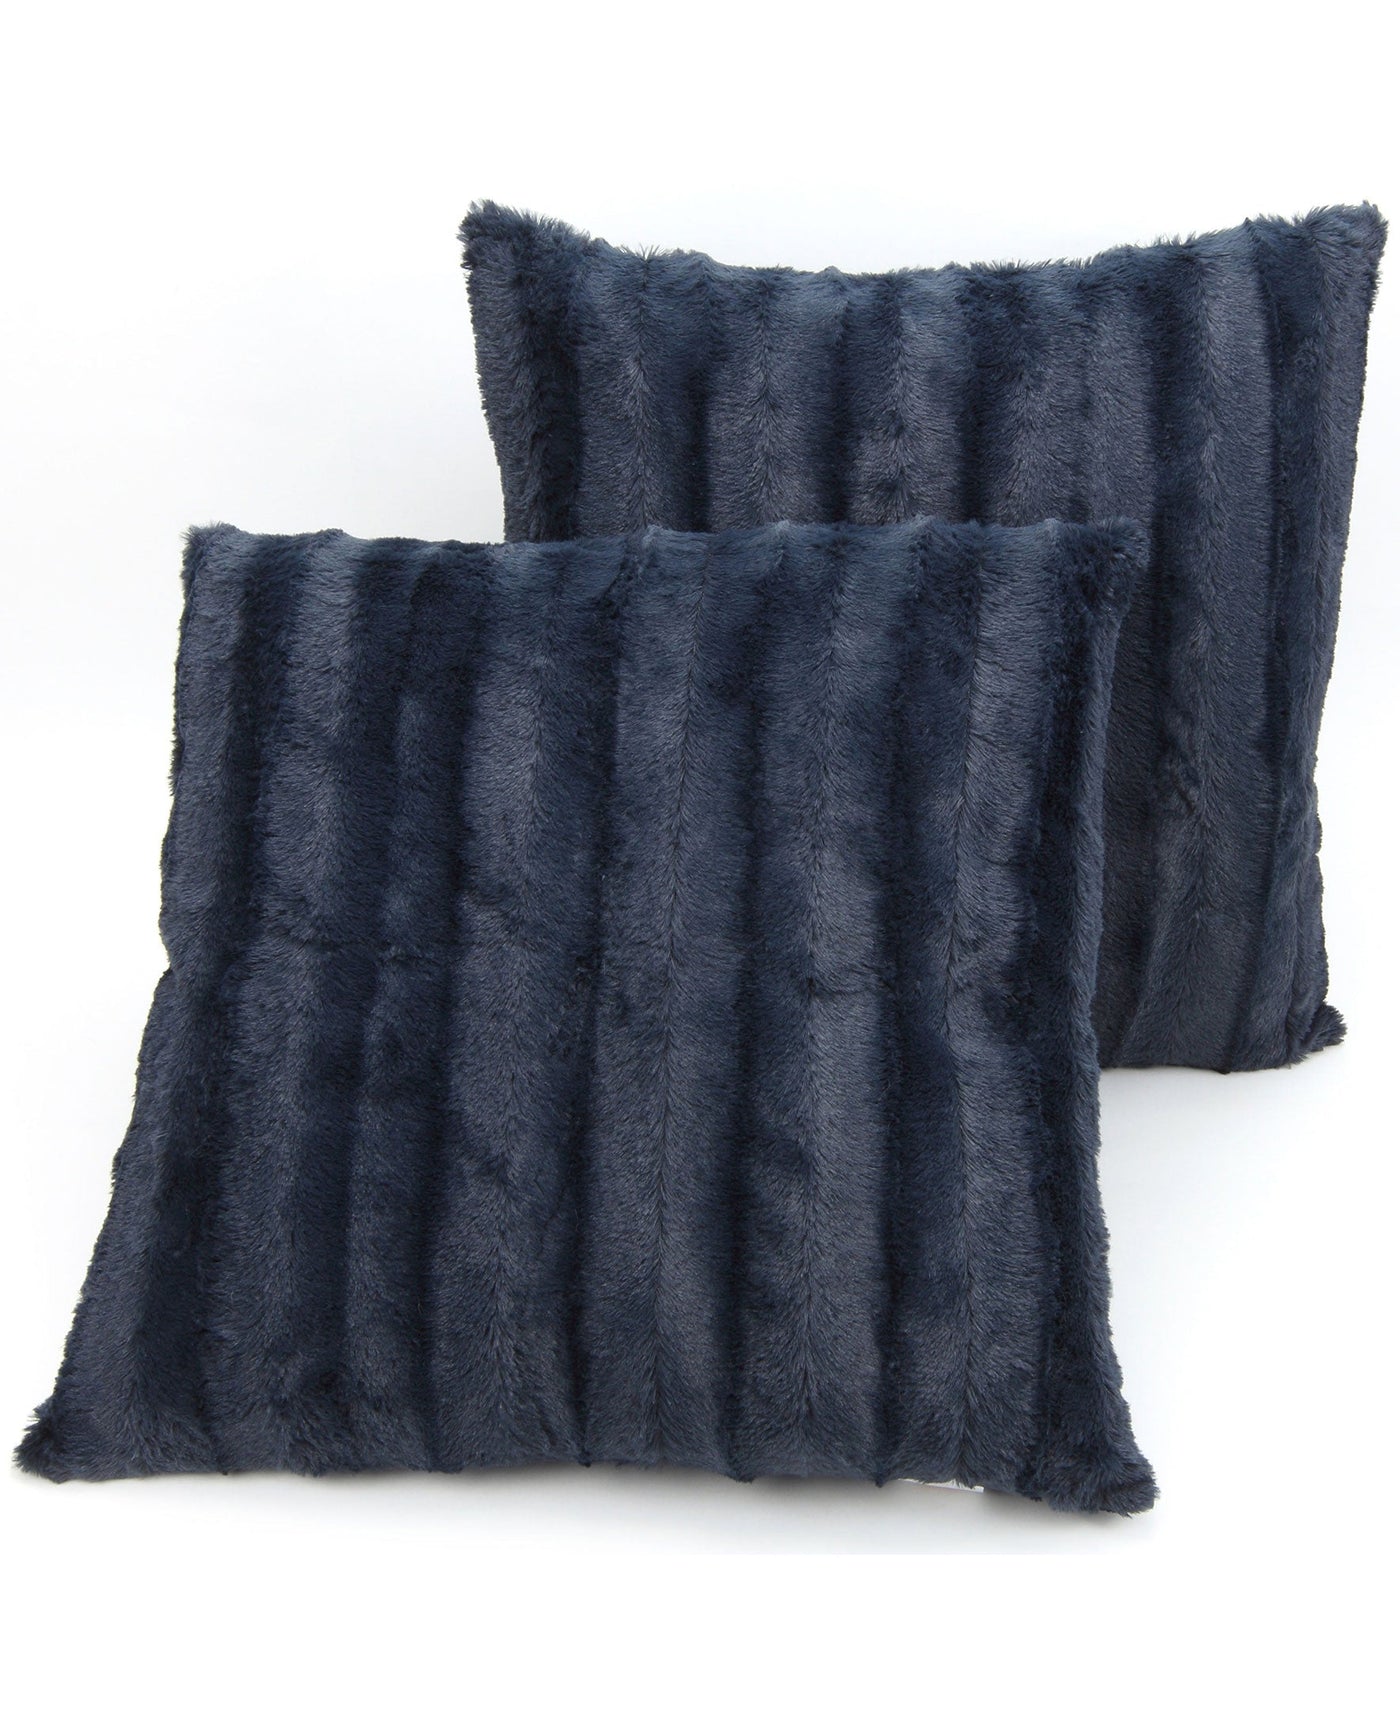 Cheer Collection Velour Throw Pillows - Set of 2 Decorative Couch